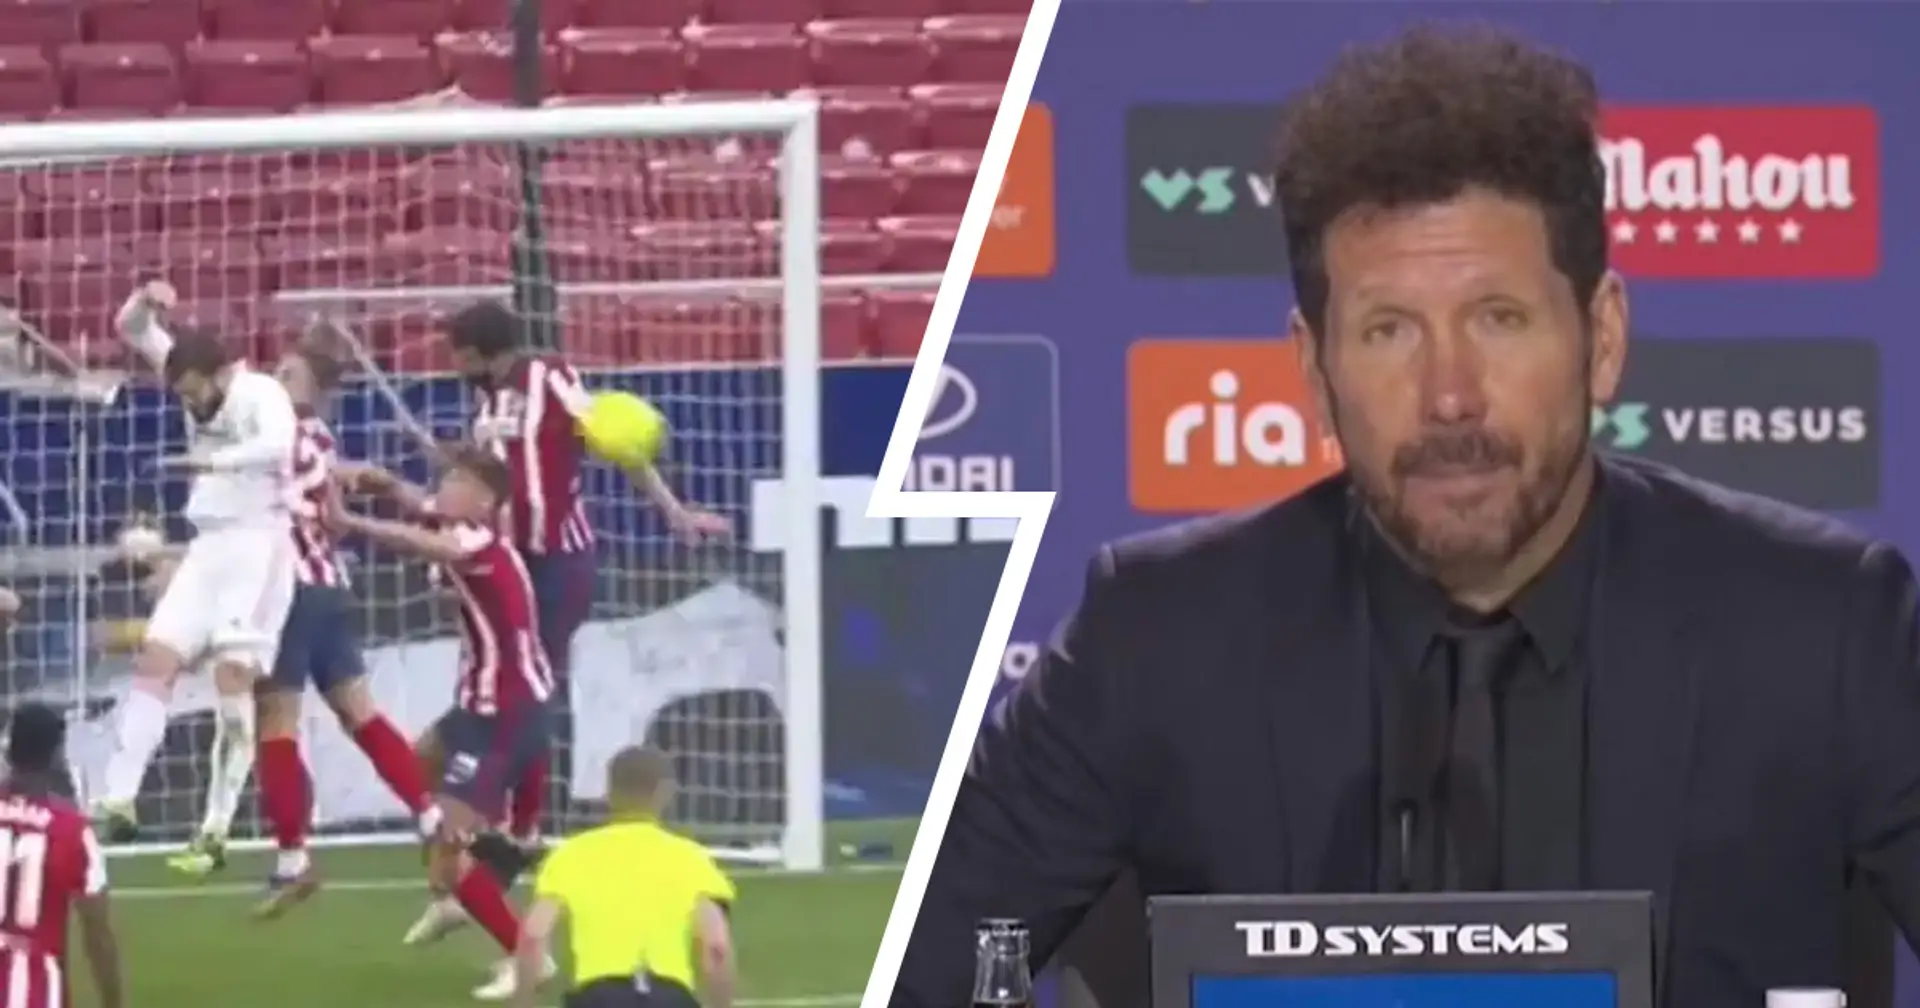 Simeone hits back at Real Madrid over VAR drama & 5 other big stories you might have missed